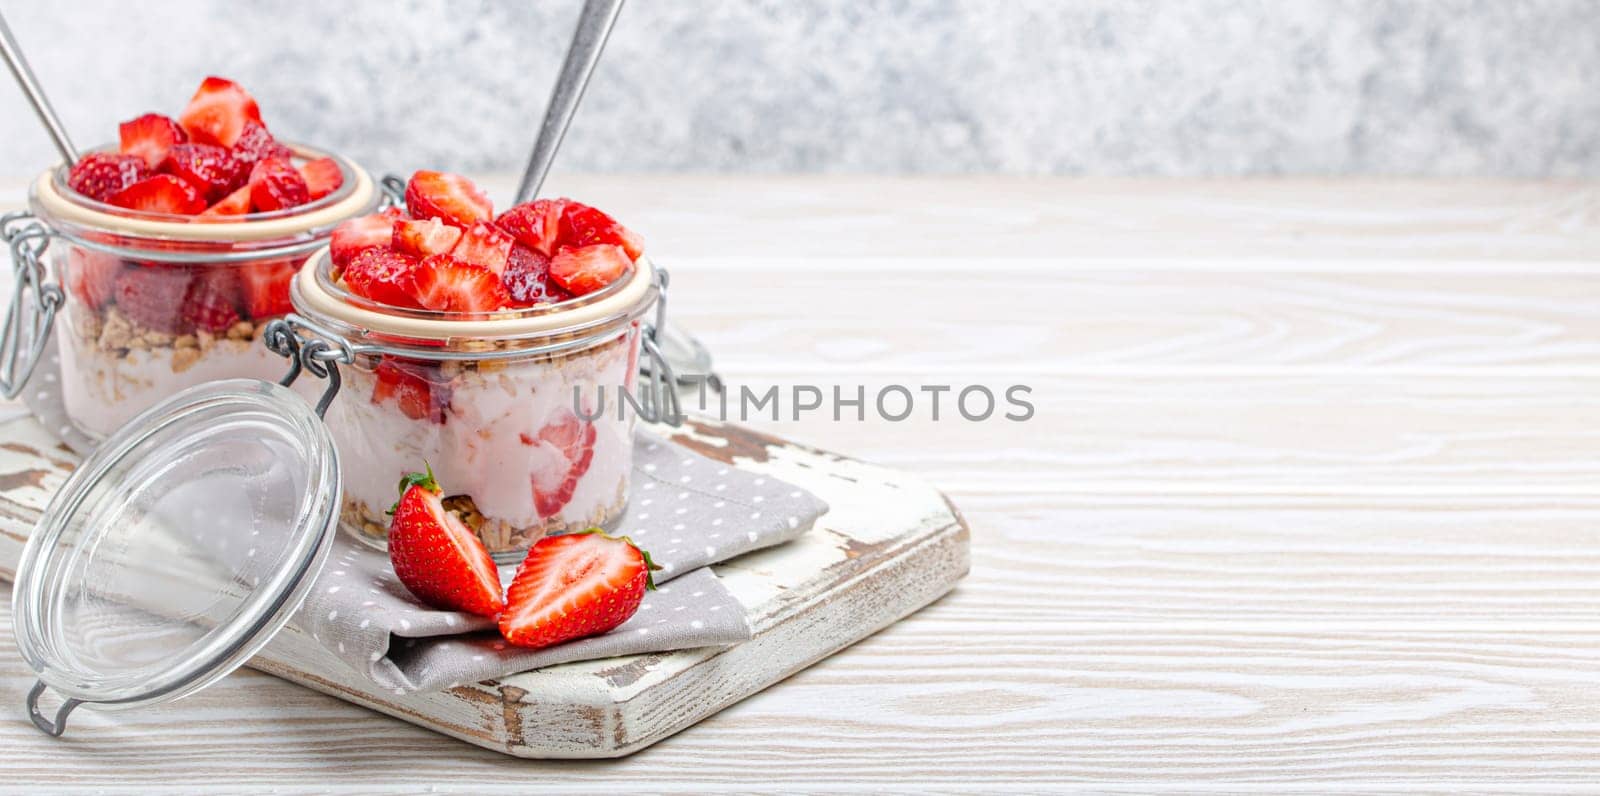 Parfait with Fresh Strawberries, Yoghurt and Crunchy Granola in Transparent Glass Mason Jars on White Rustic Wooden Background Angle View, Healthy Breakfast or Light Summer Dessert, Copy Space